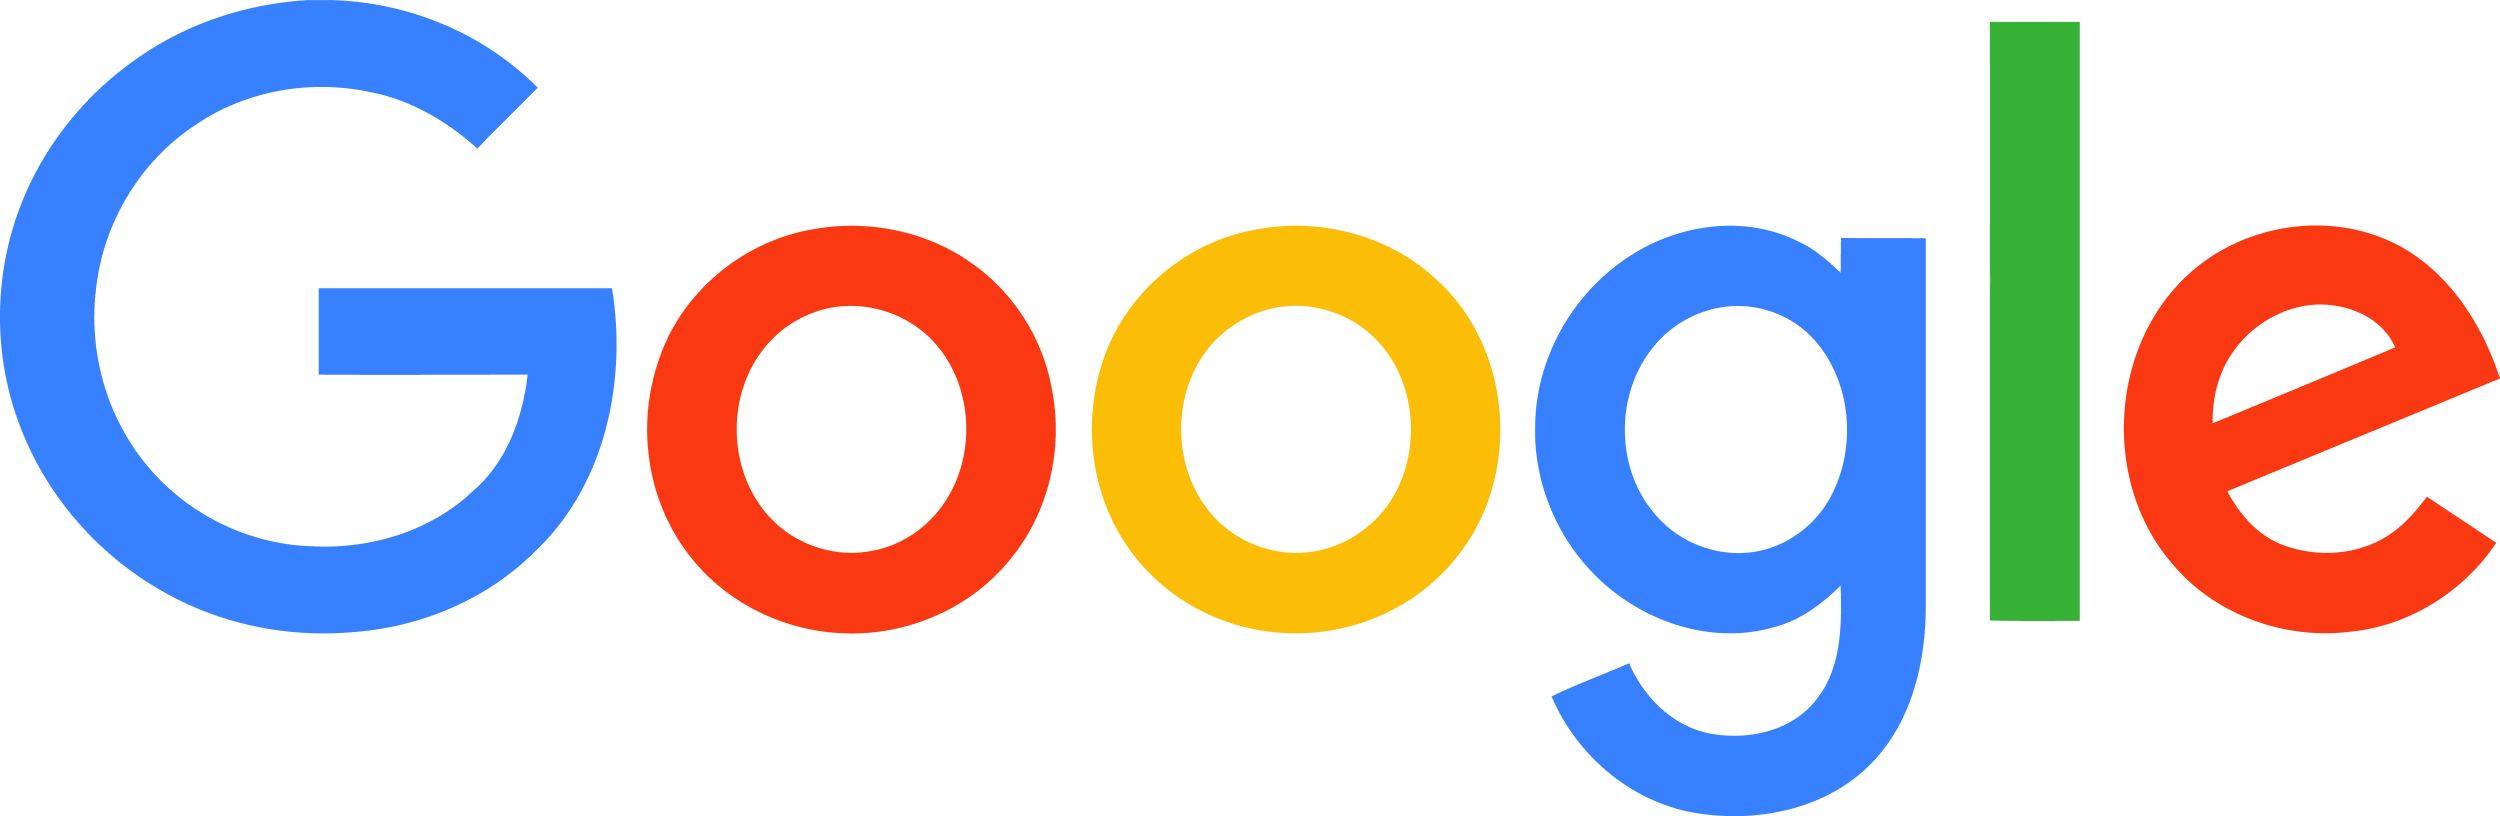 Google Channel Manager